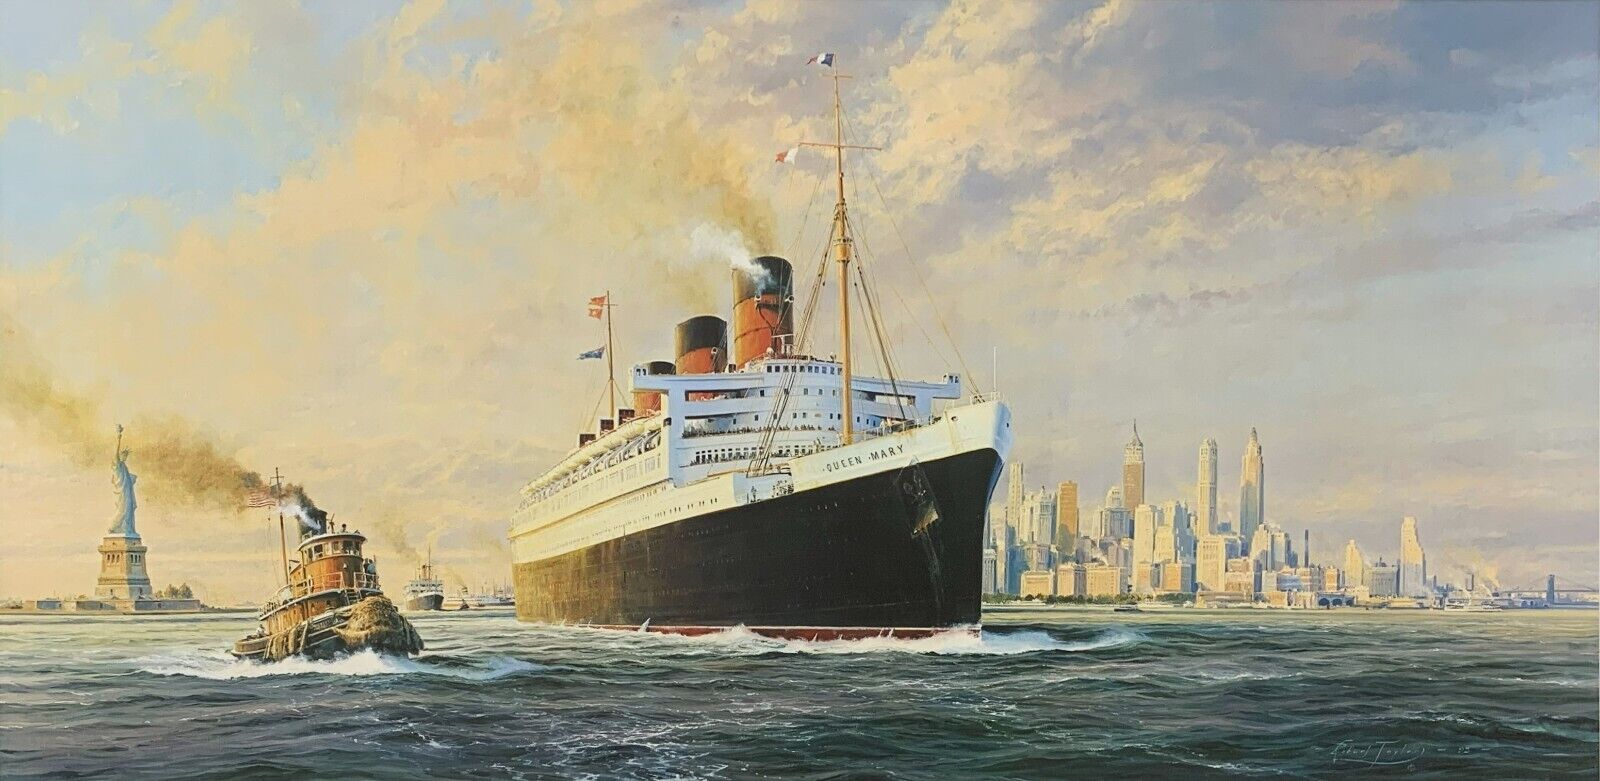 Farewell America by Robert Taylor, maritime art print of the Queen Mary